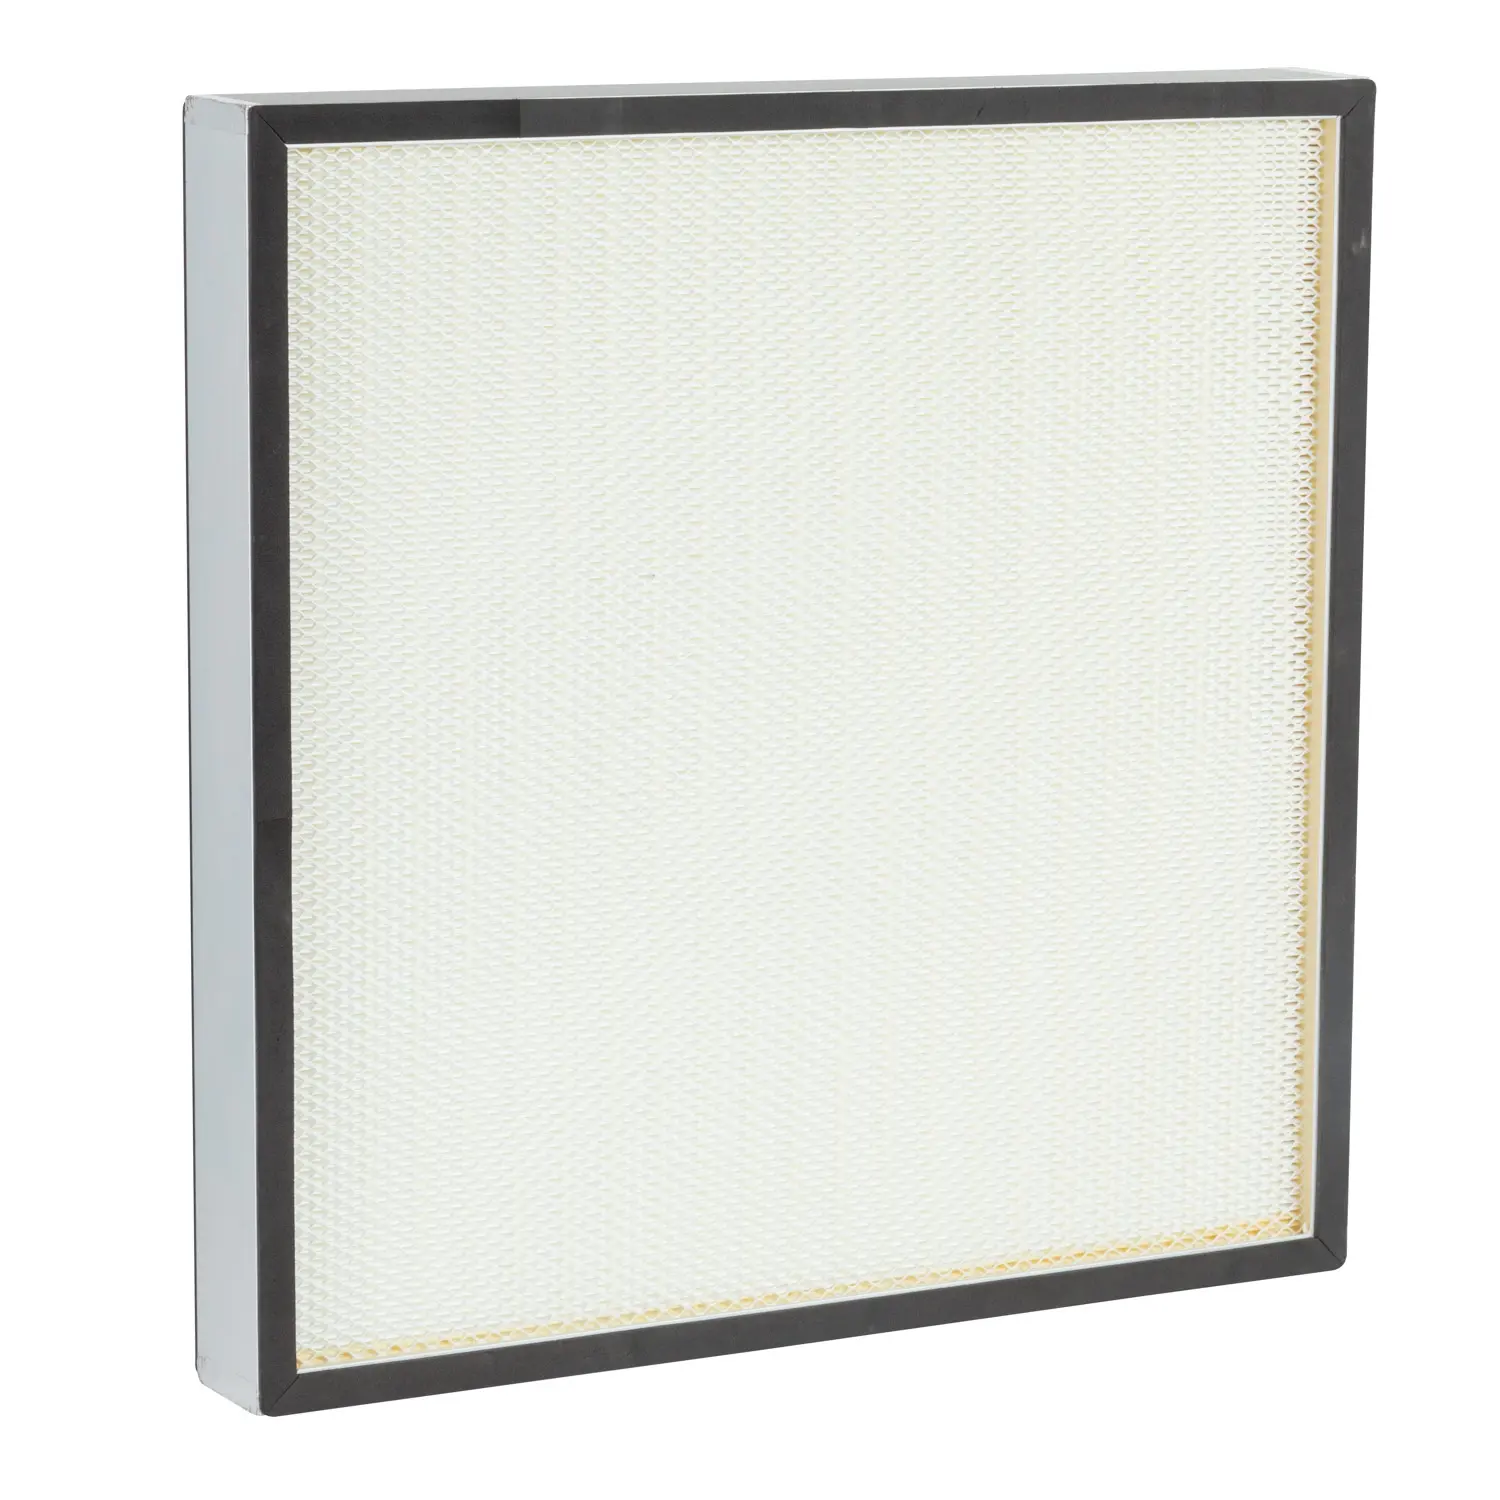 China Wholesale Glass Fiber Panel Filter Mini Pleated Clean Room Hepa Filter H14